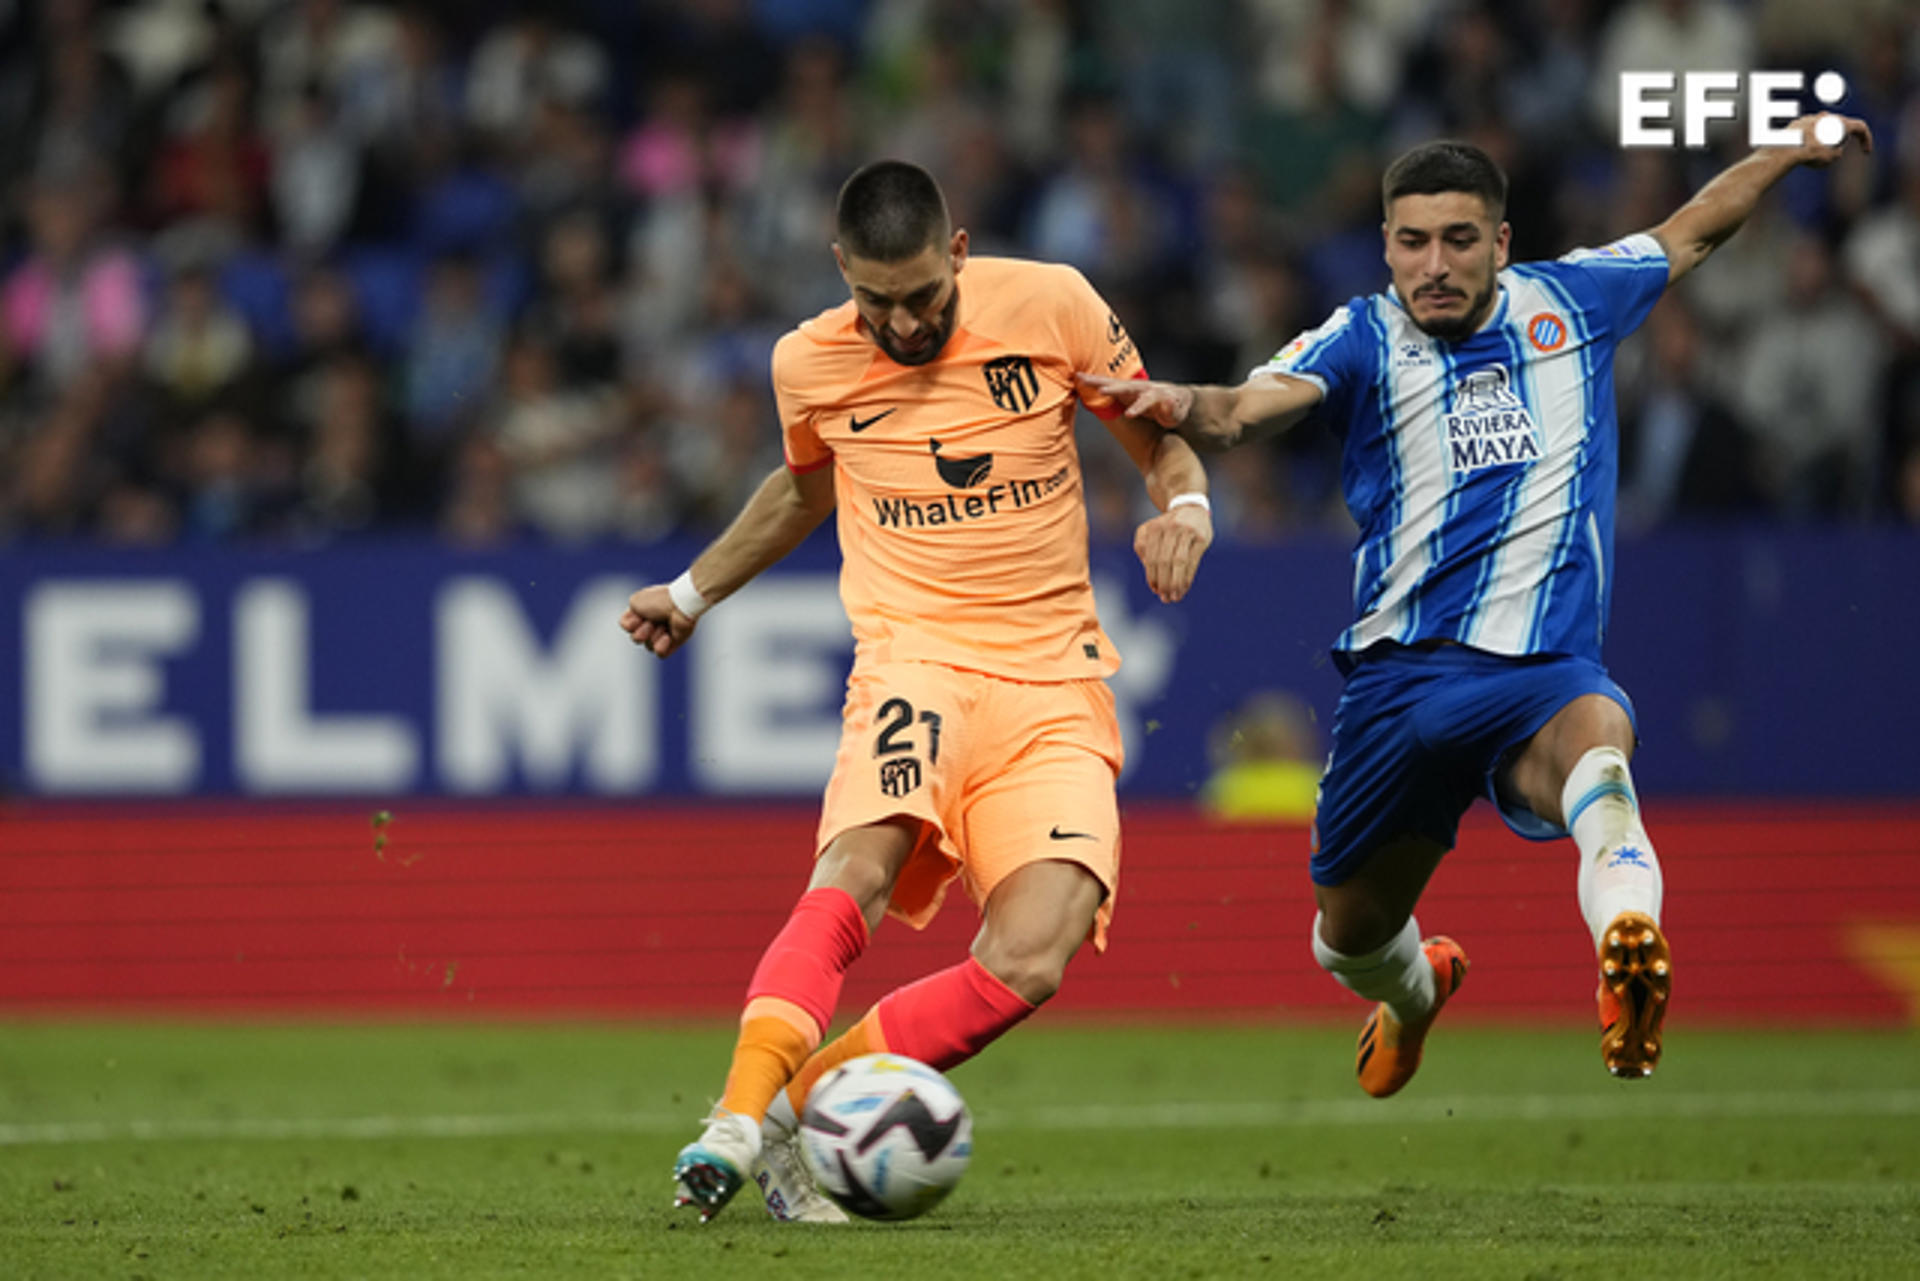 Atletico Madrid's Yannick Carrasco (L) scores against Espanyol during a LaLiga match at RCD Stadium in Barcelona on 24 May 2023. EFE/Alejandro Garcia
